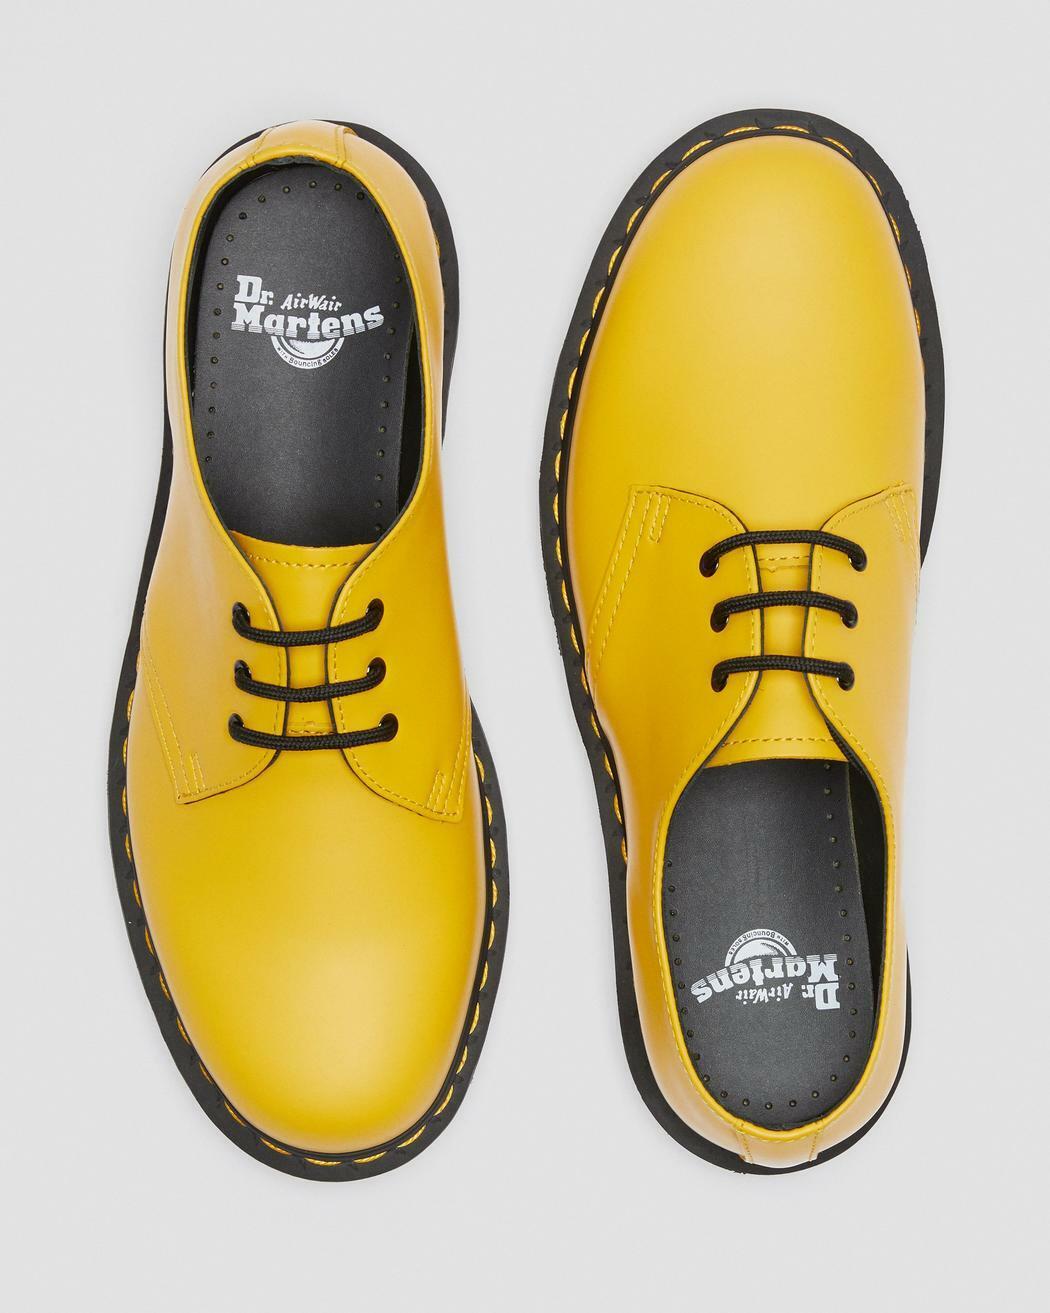 Dr. Martens Classic 1461 Yellow Smooth 3-Eyelet Lace-up Flat Shoes UK 3 - 12